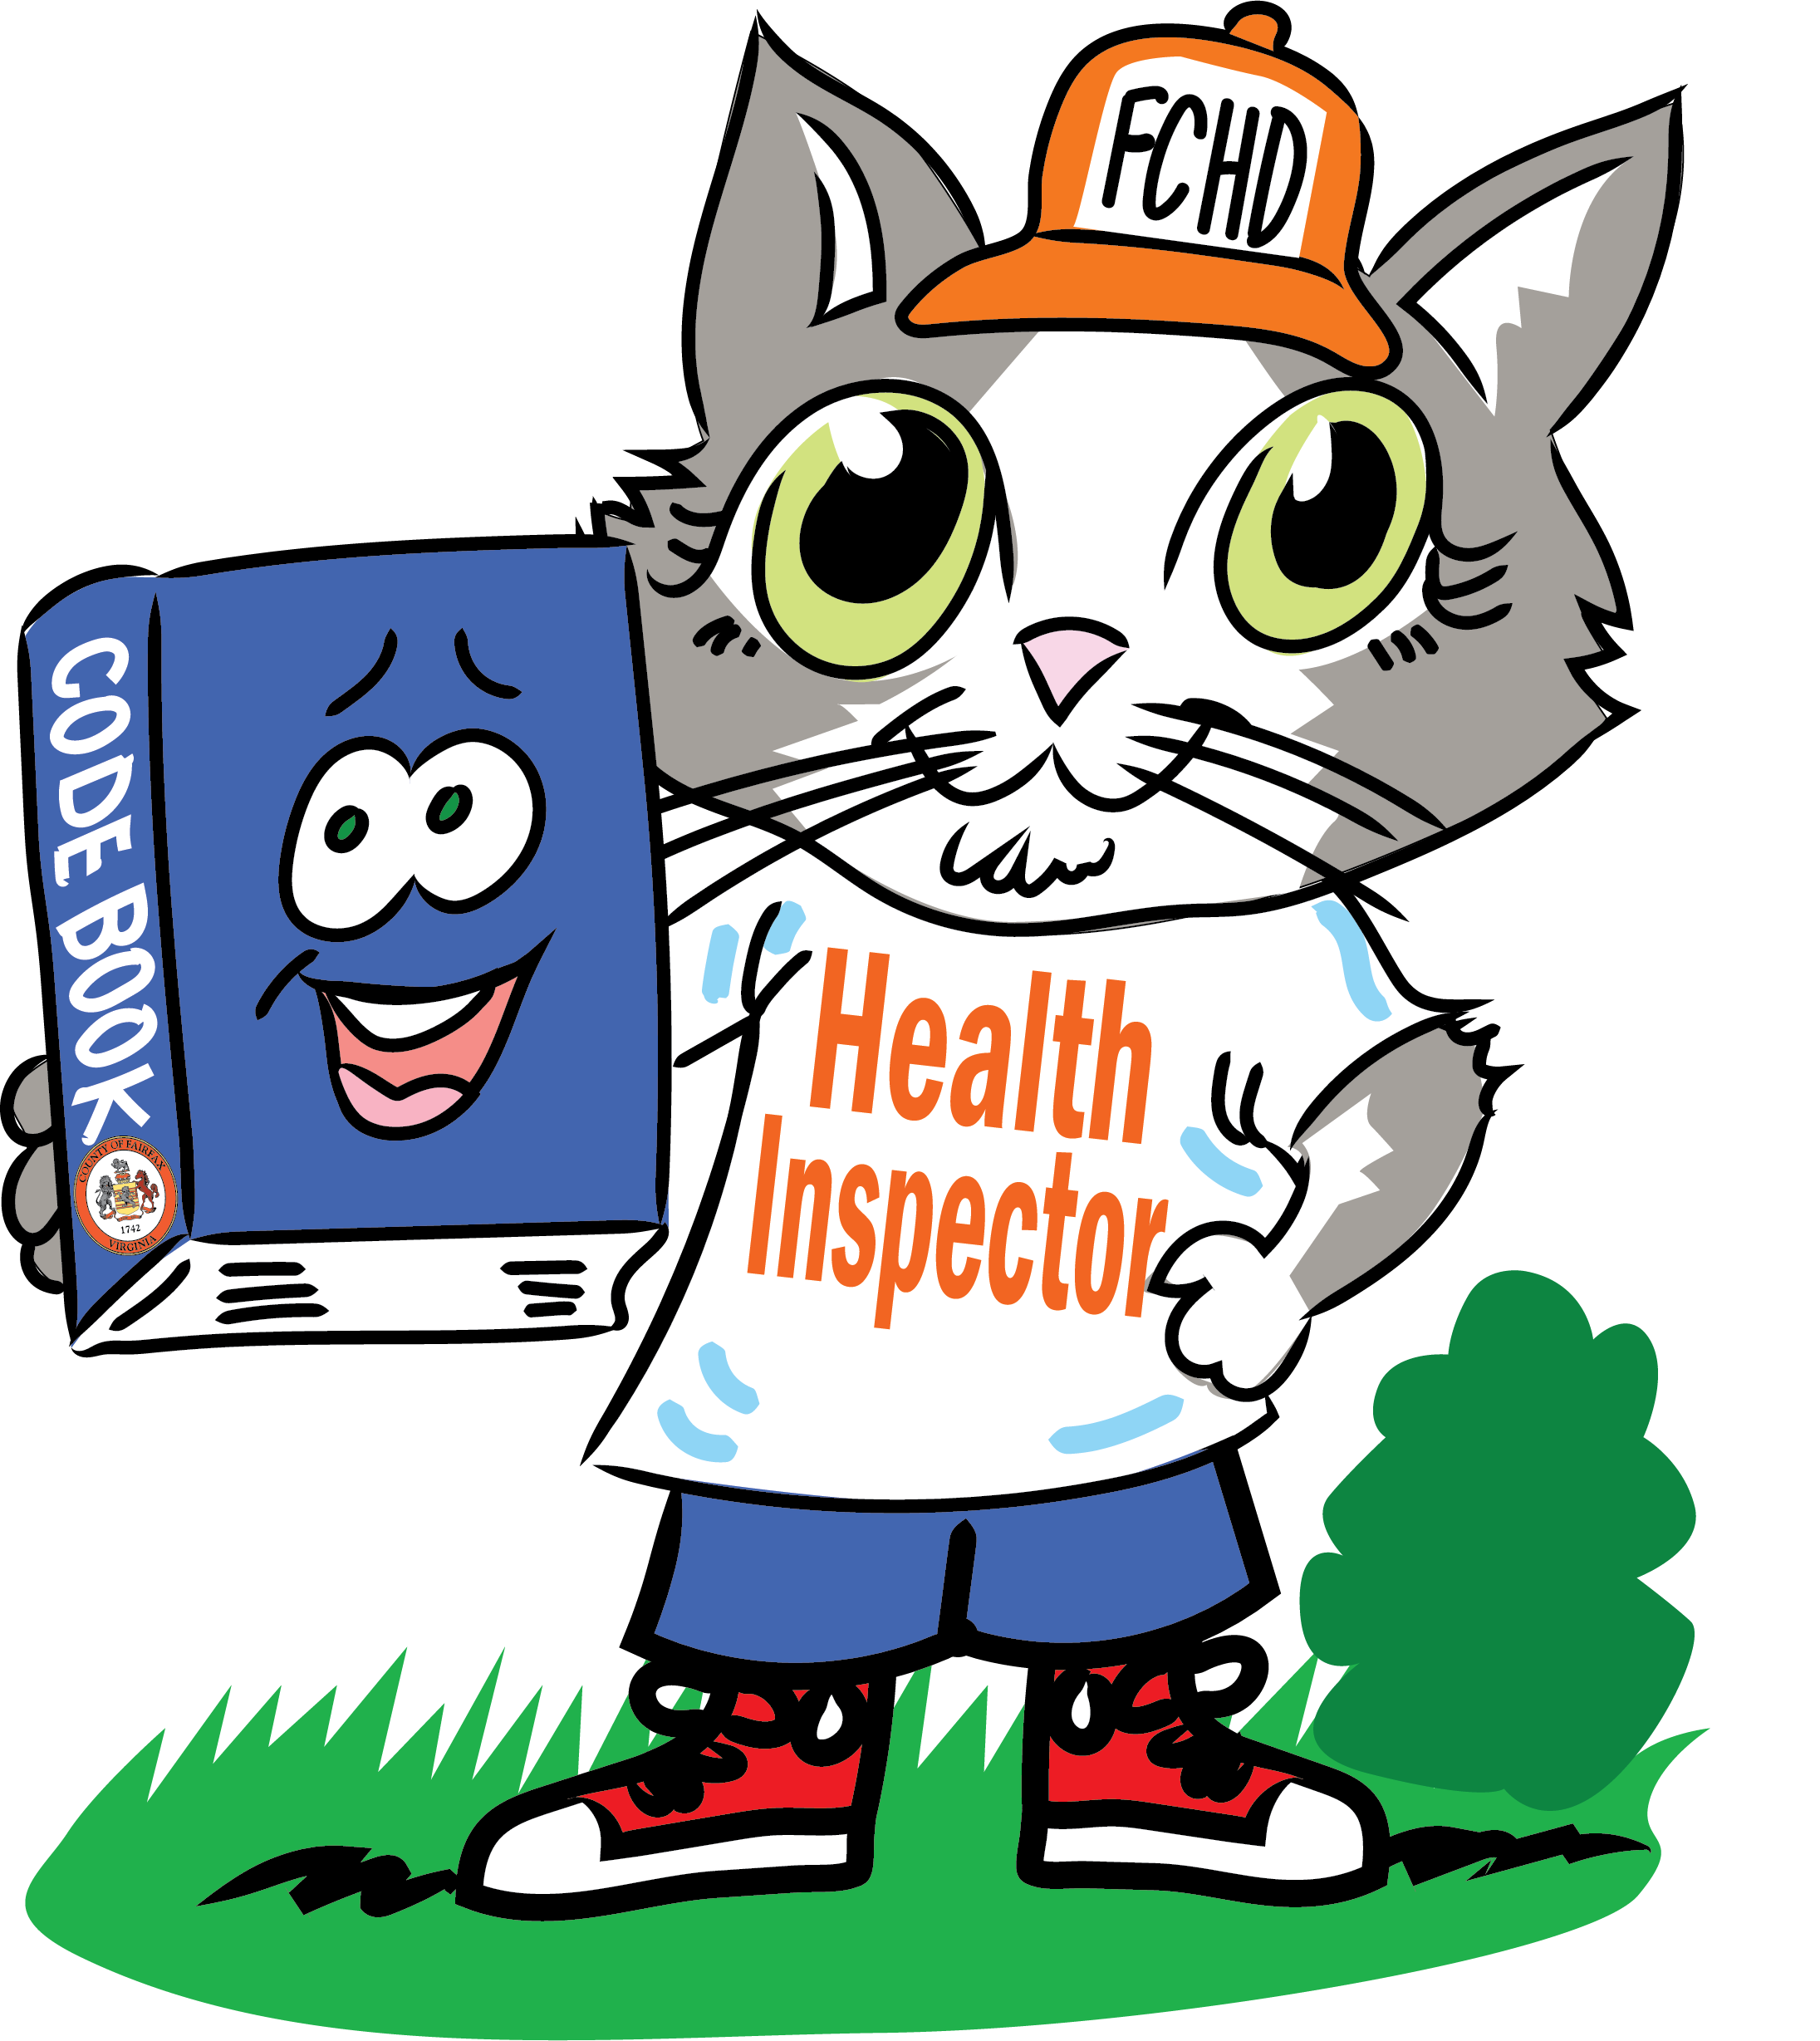 Reggie the code book and Cody the cat health inspector